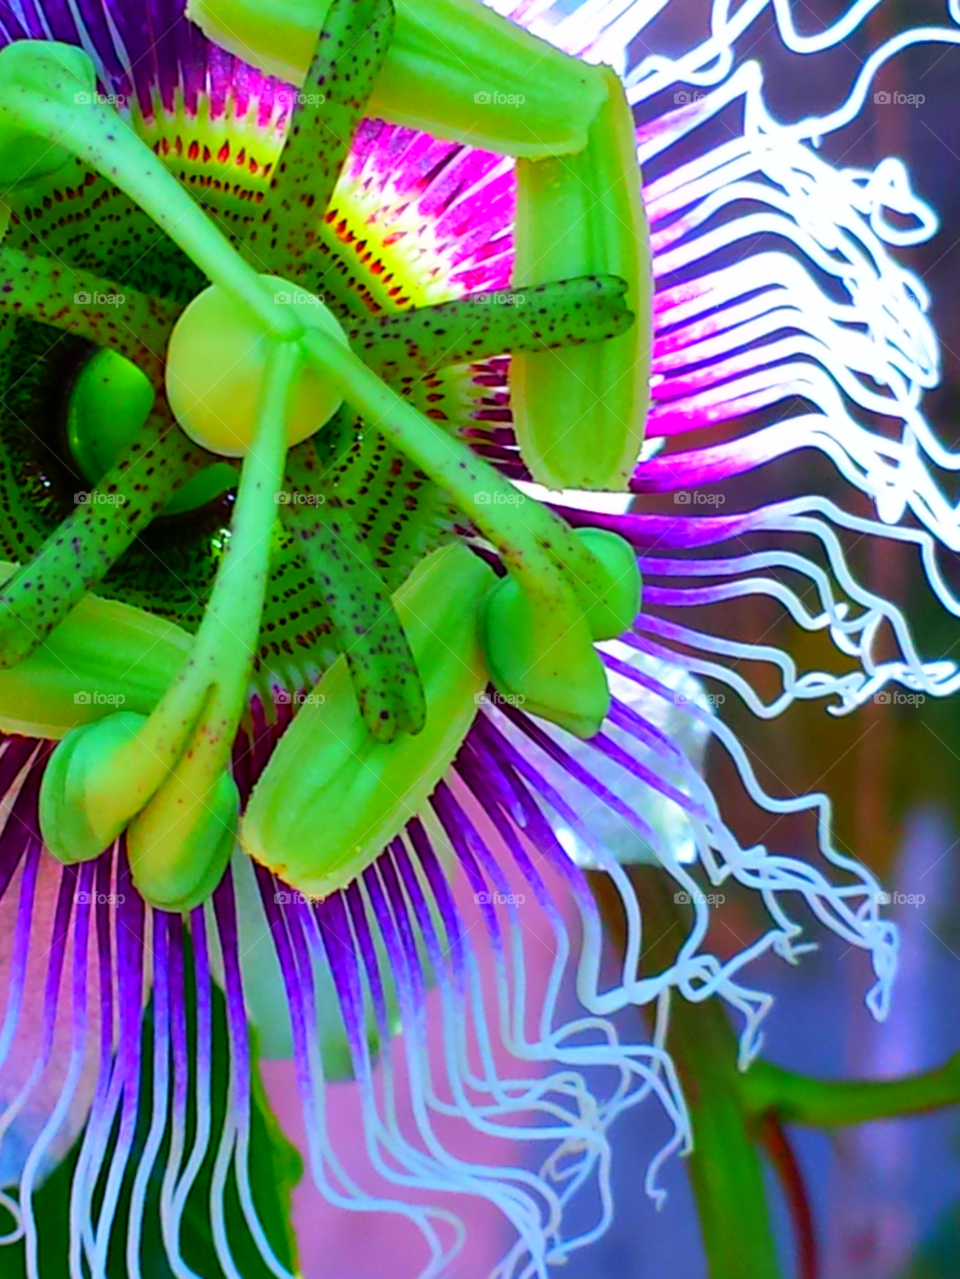 "Colorful Passion Flower"